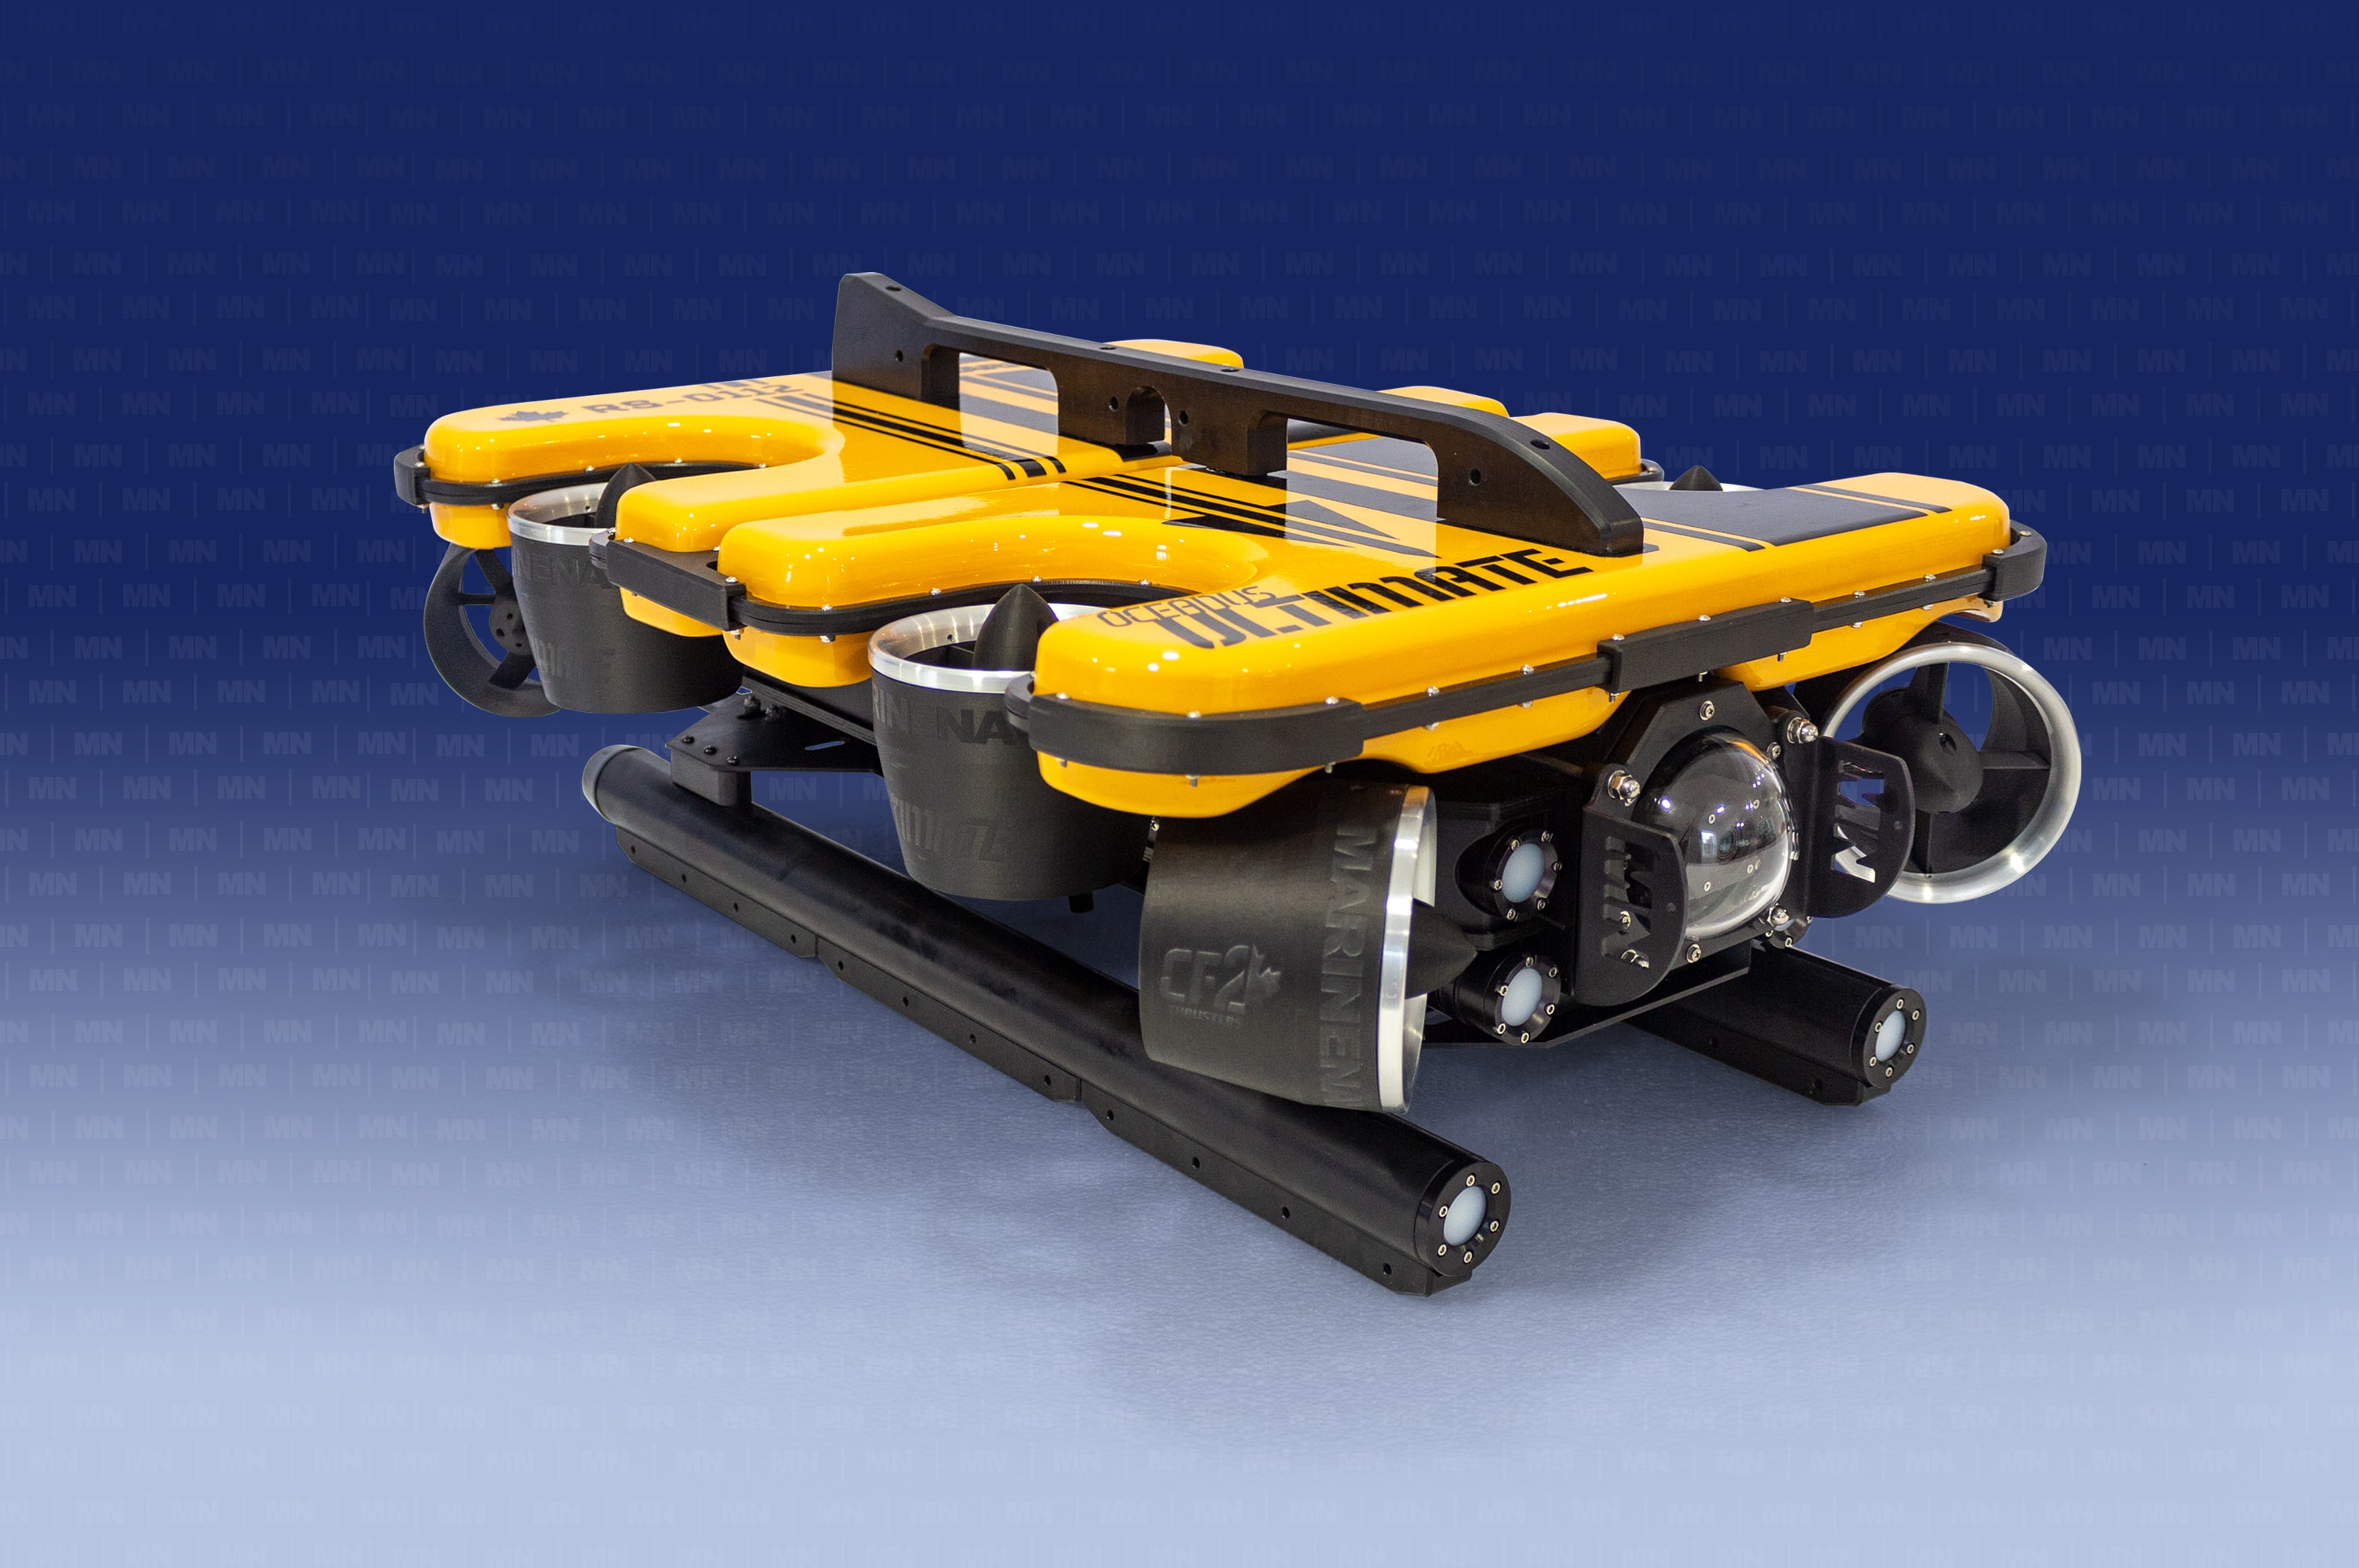 Lateral ROV movement, sustained pitch and roll and even barrel rolls. Unparalleled control system and superior thruster performance delivers fully vectorized ROV maneuverability.